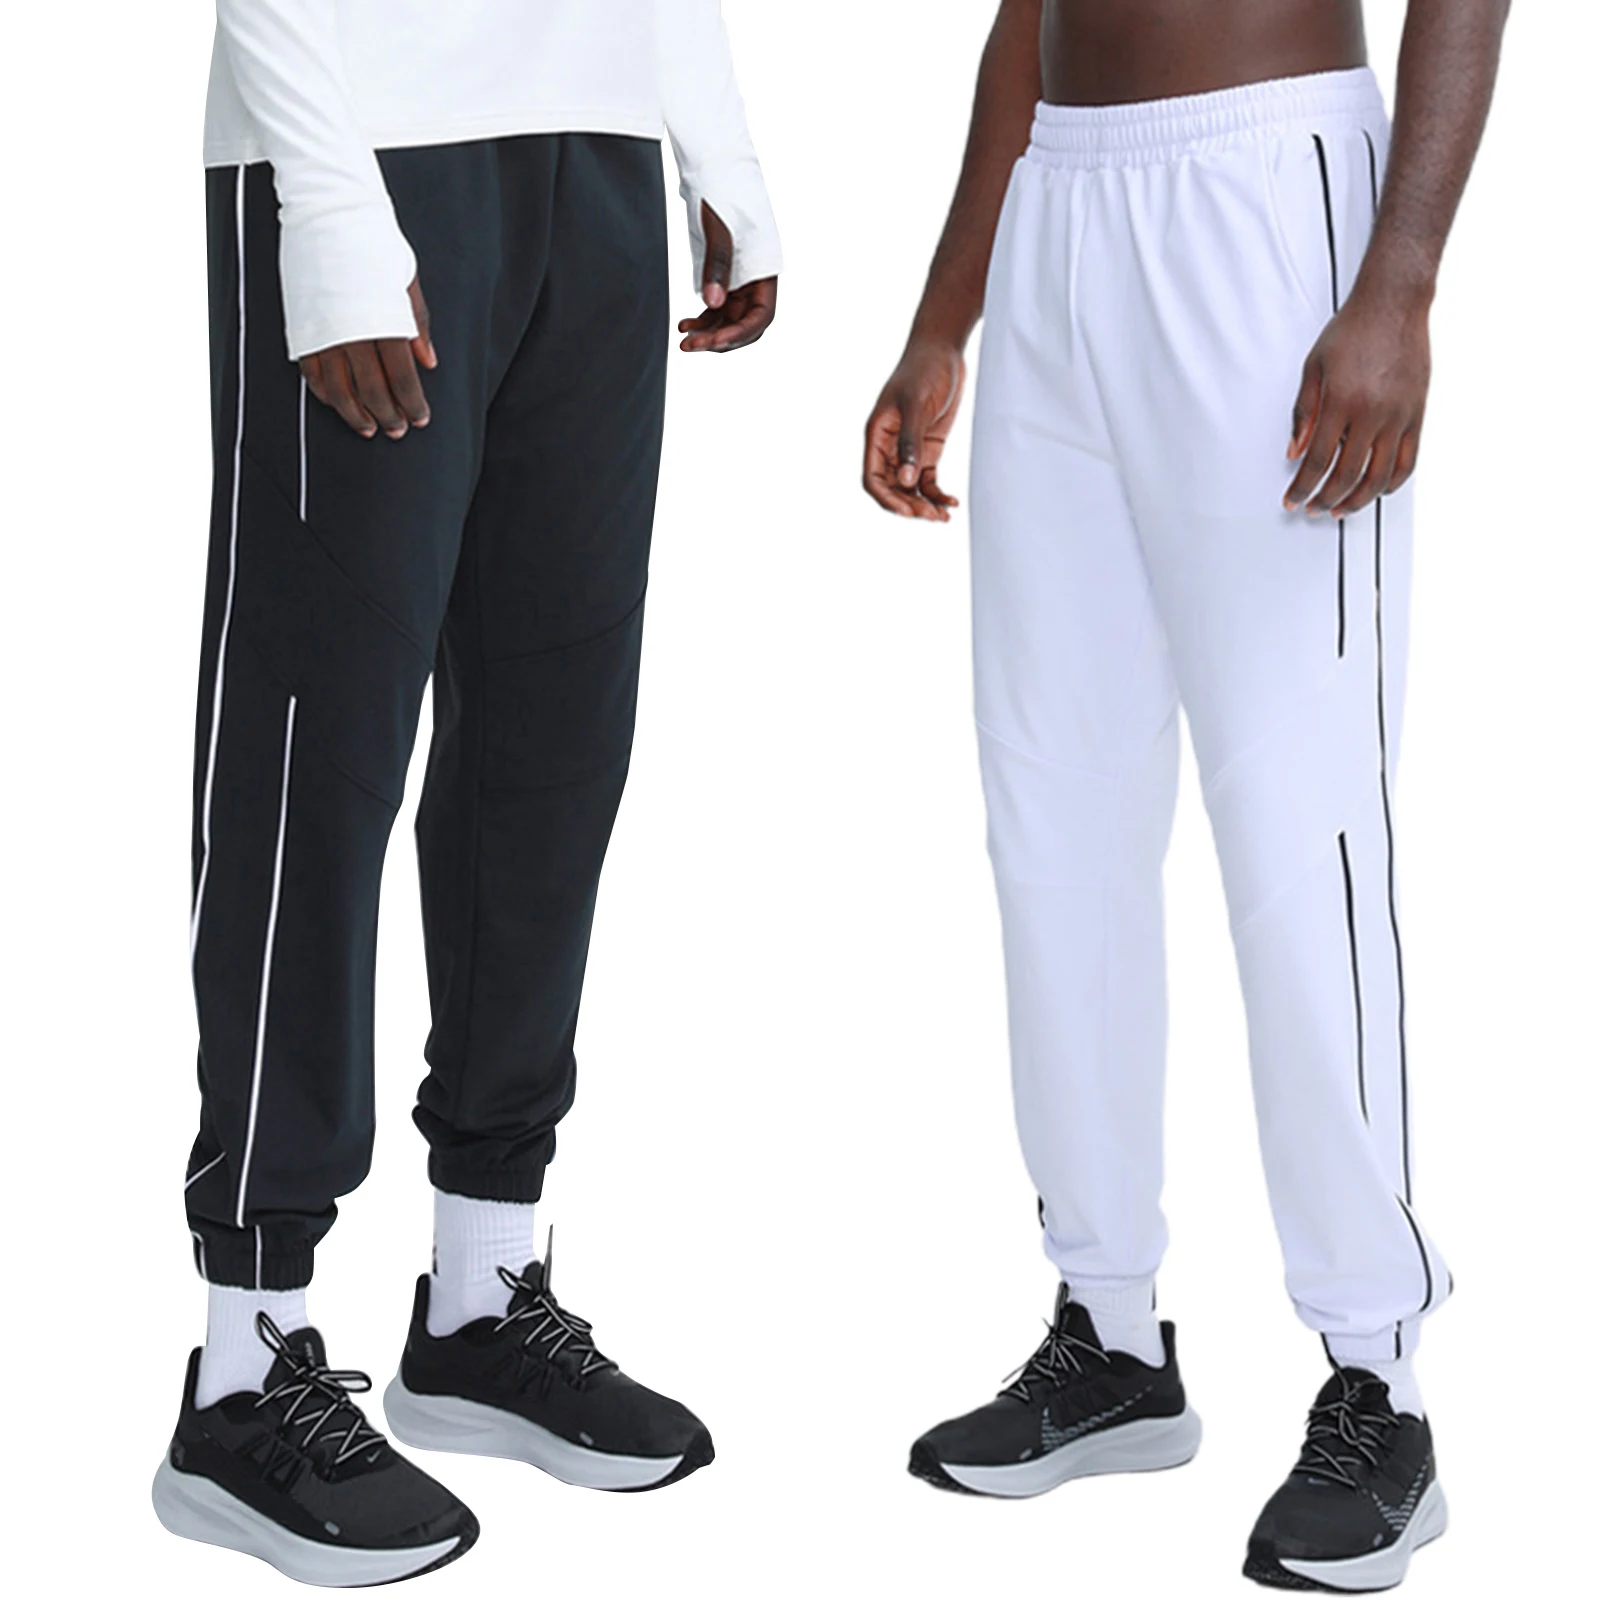 

Men Casual Patchwork Sport Trousers, Casual Elastic Waist Cuffed Feet Tapered Pant with Pocket